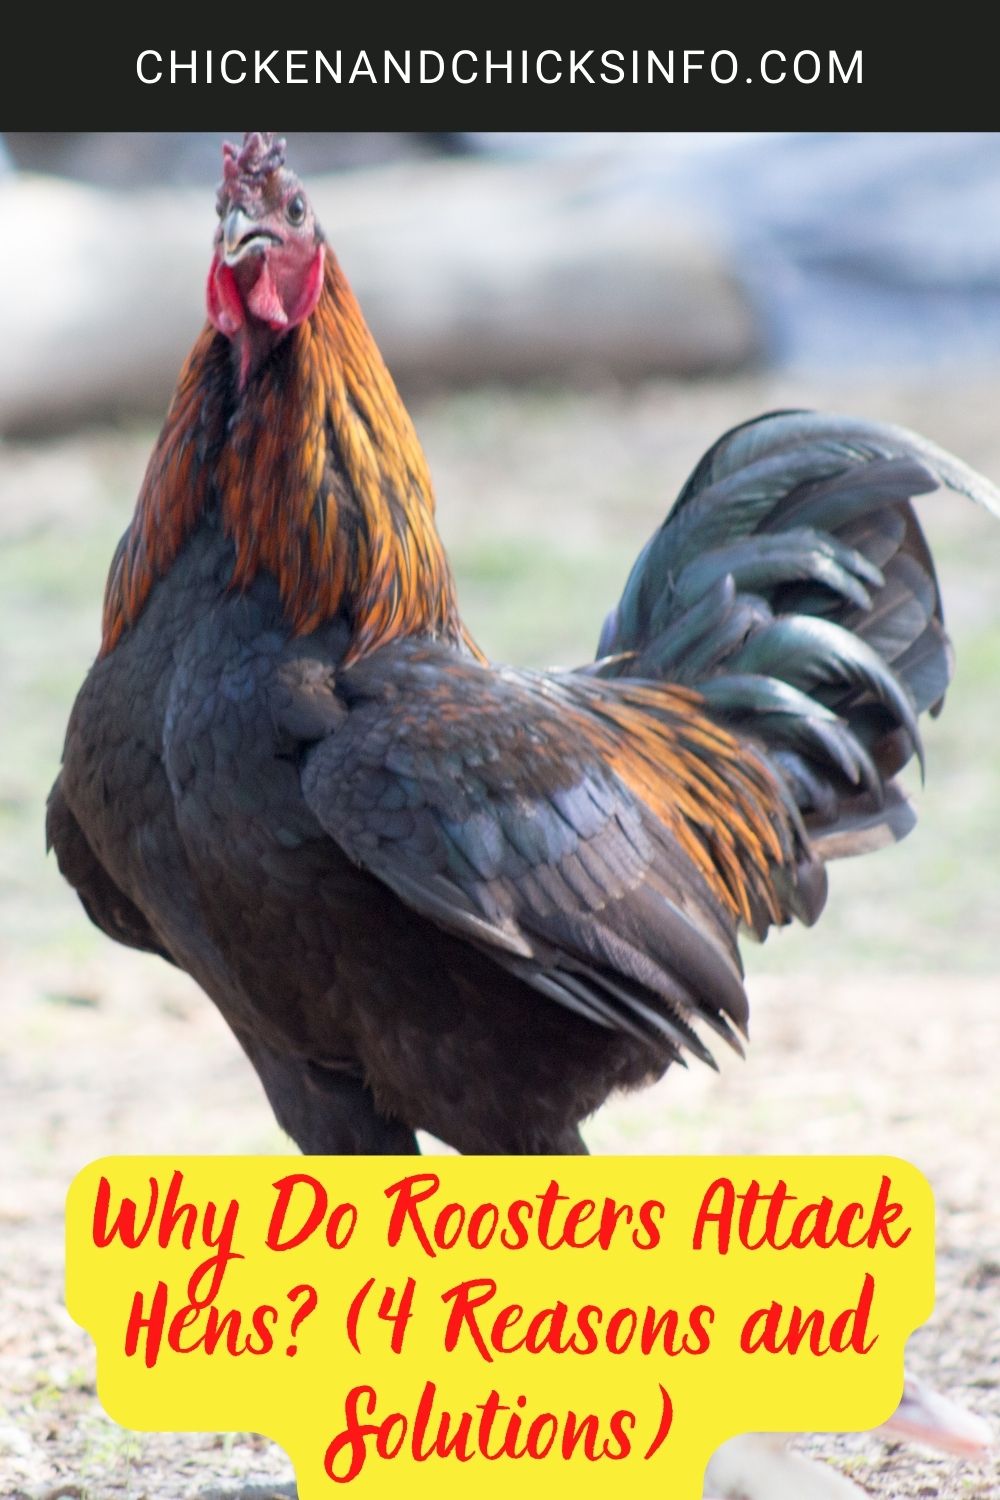 Why Do Roosters Attack Hens? (4 Reasons and Solutions) poster.
